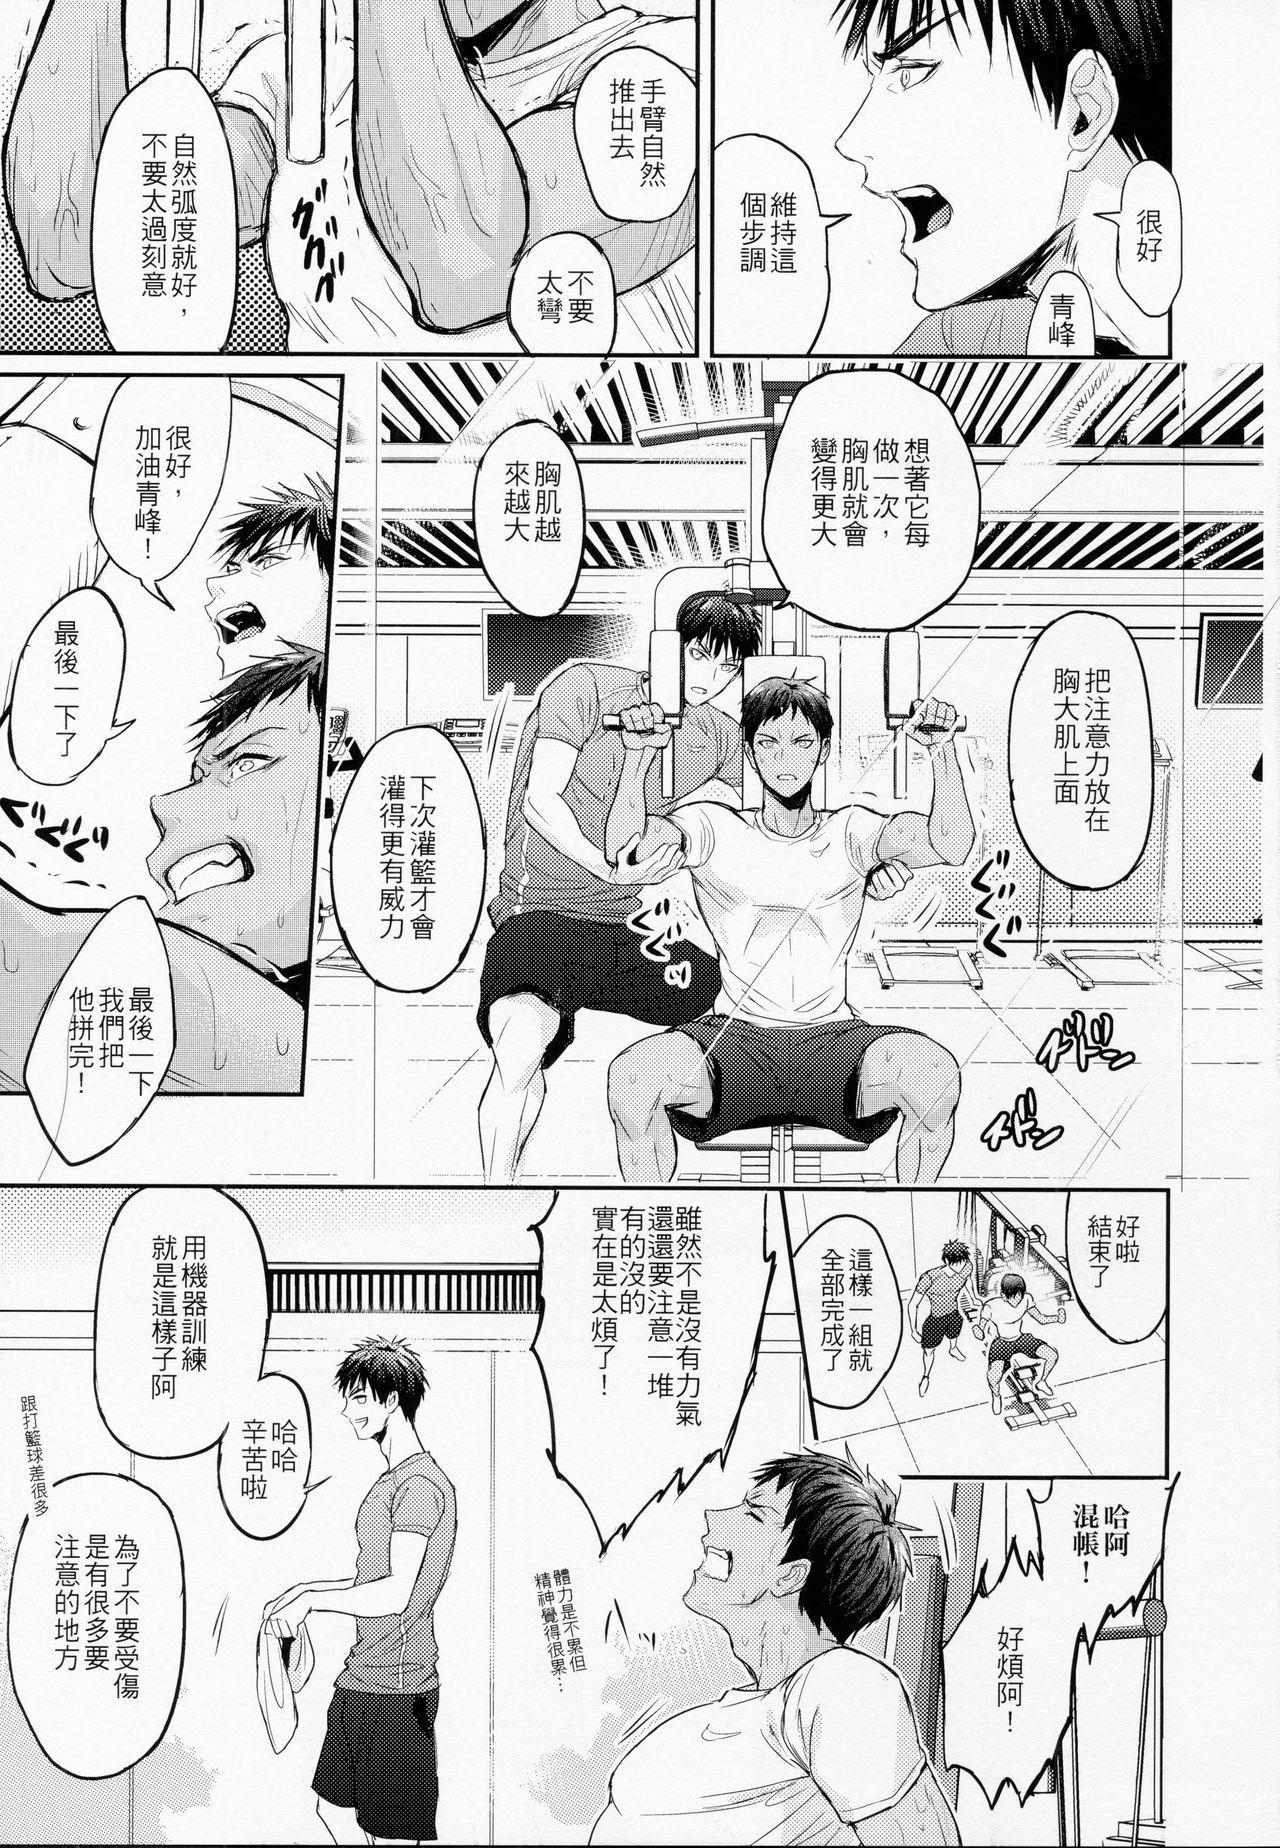 Cdzinha This is how we WORK IT OUT - Kuroko no basuke Double - Page 4